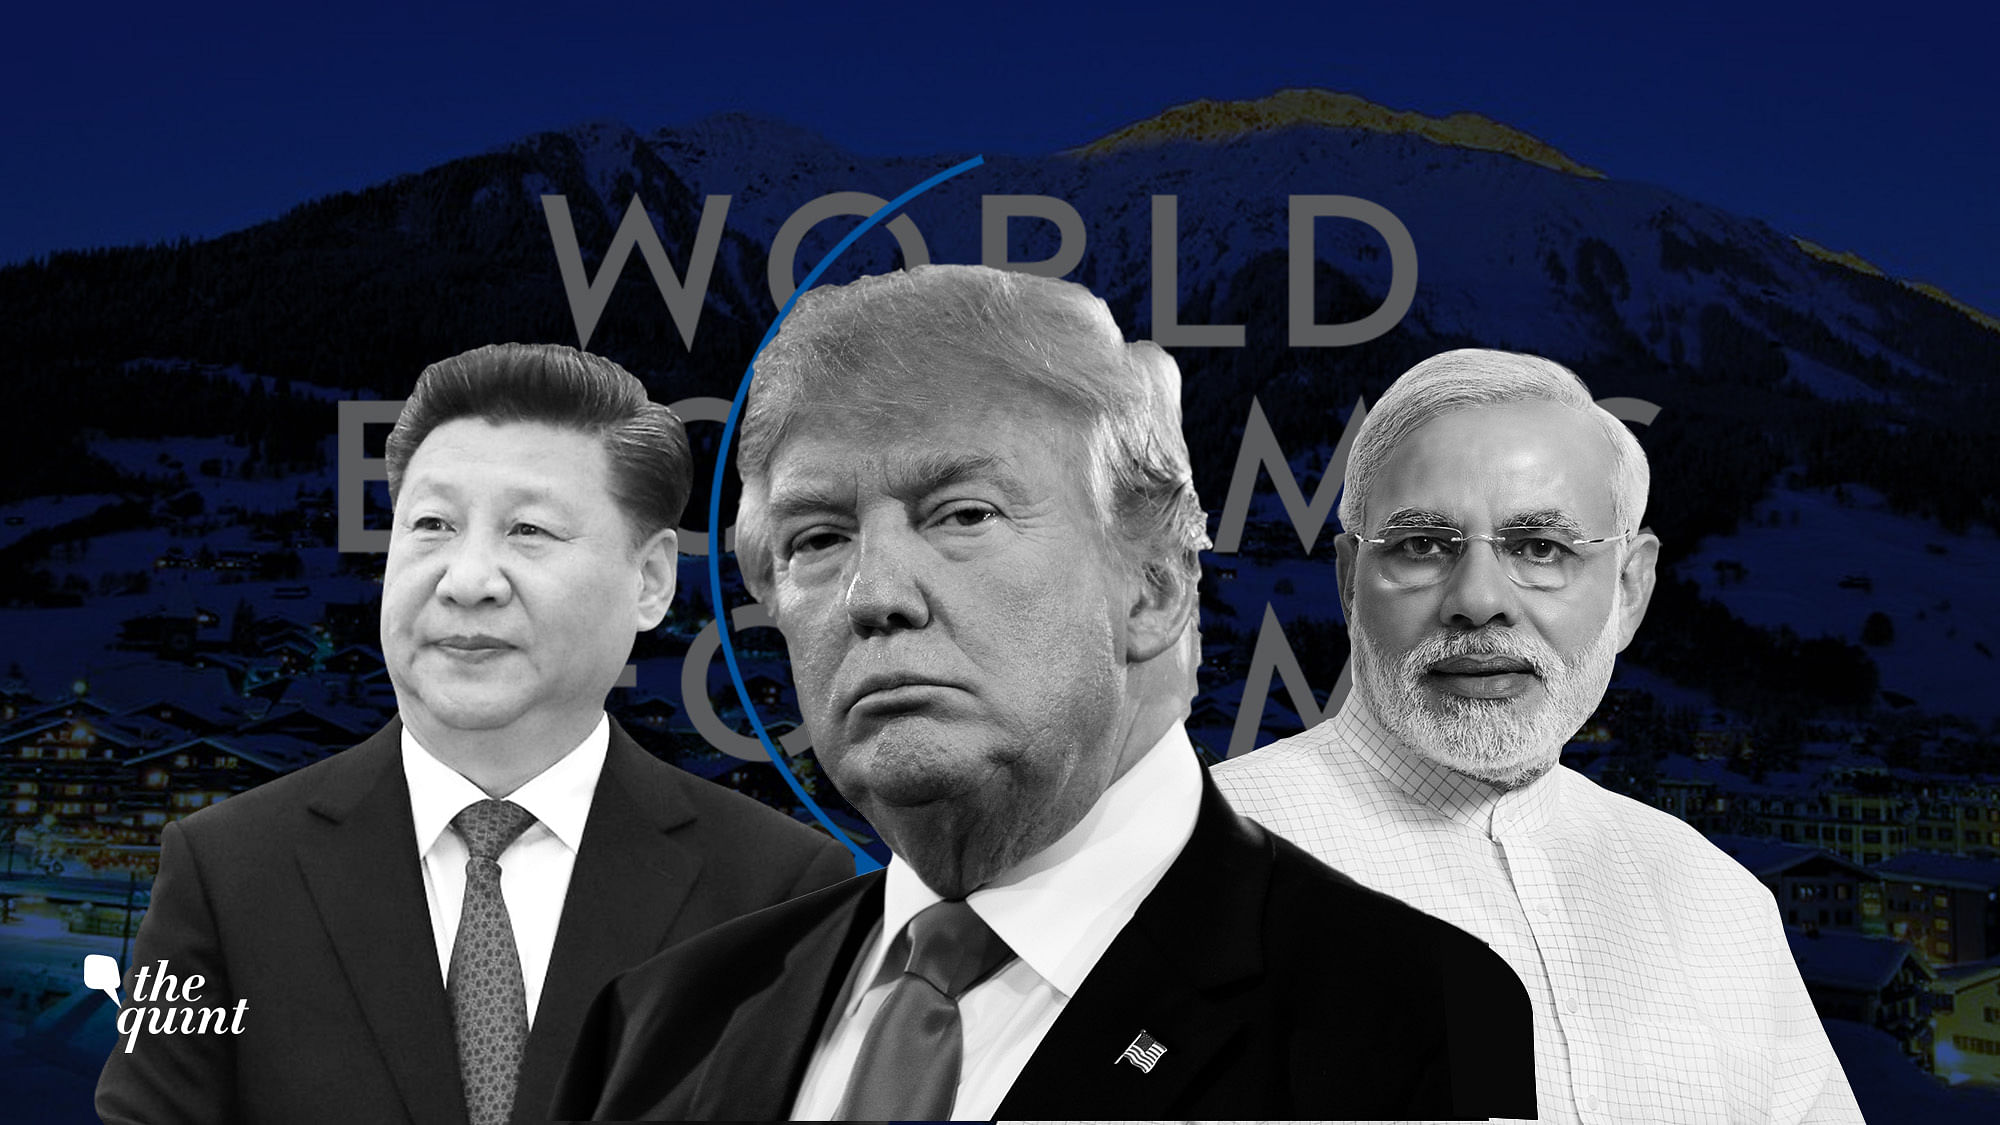 Trump will be the first serving US president to attend Davos since Bill Clinton in 2000. But Trump won’t be the only major world leader in attendance.